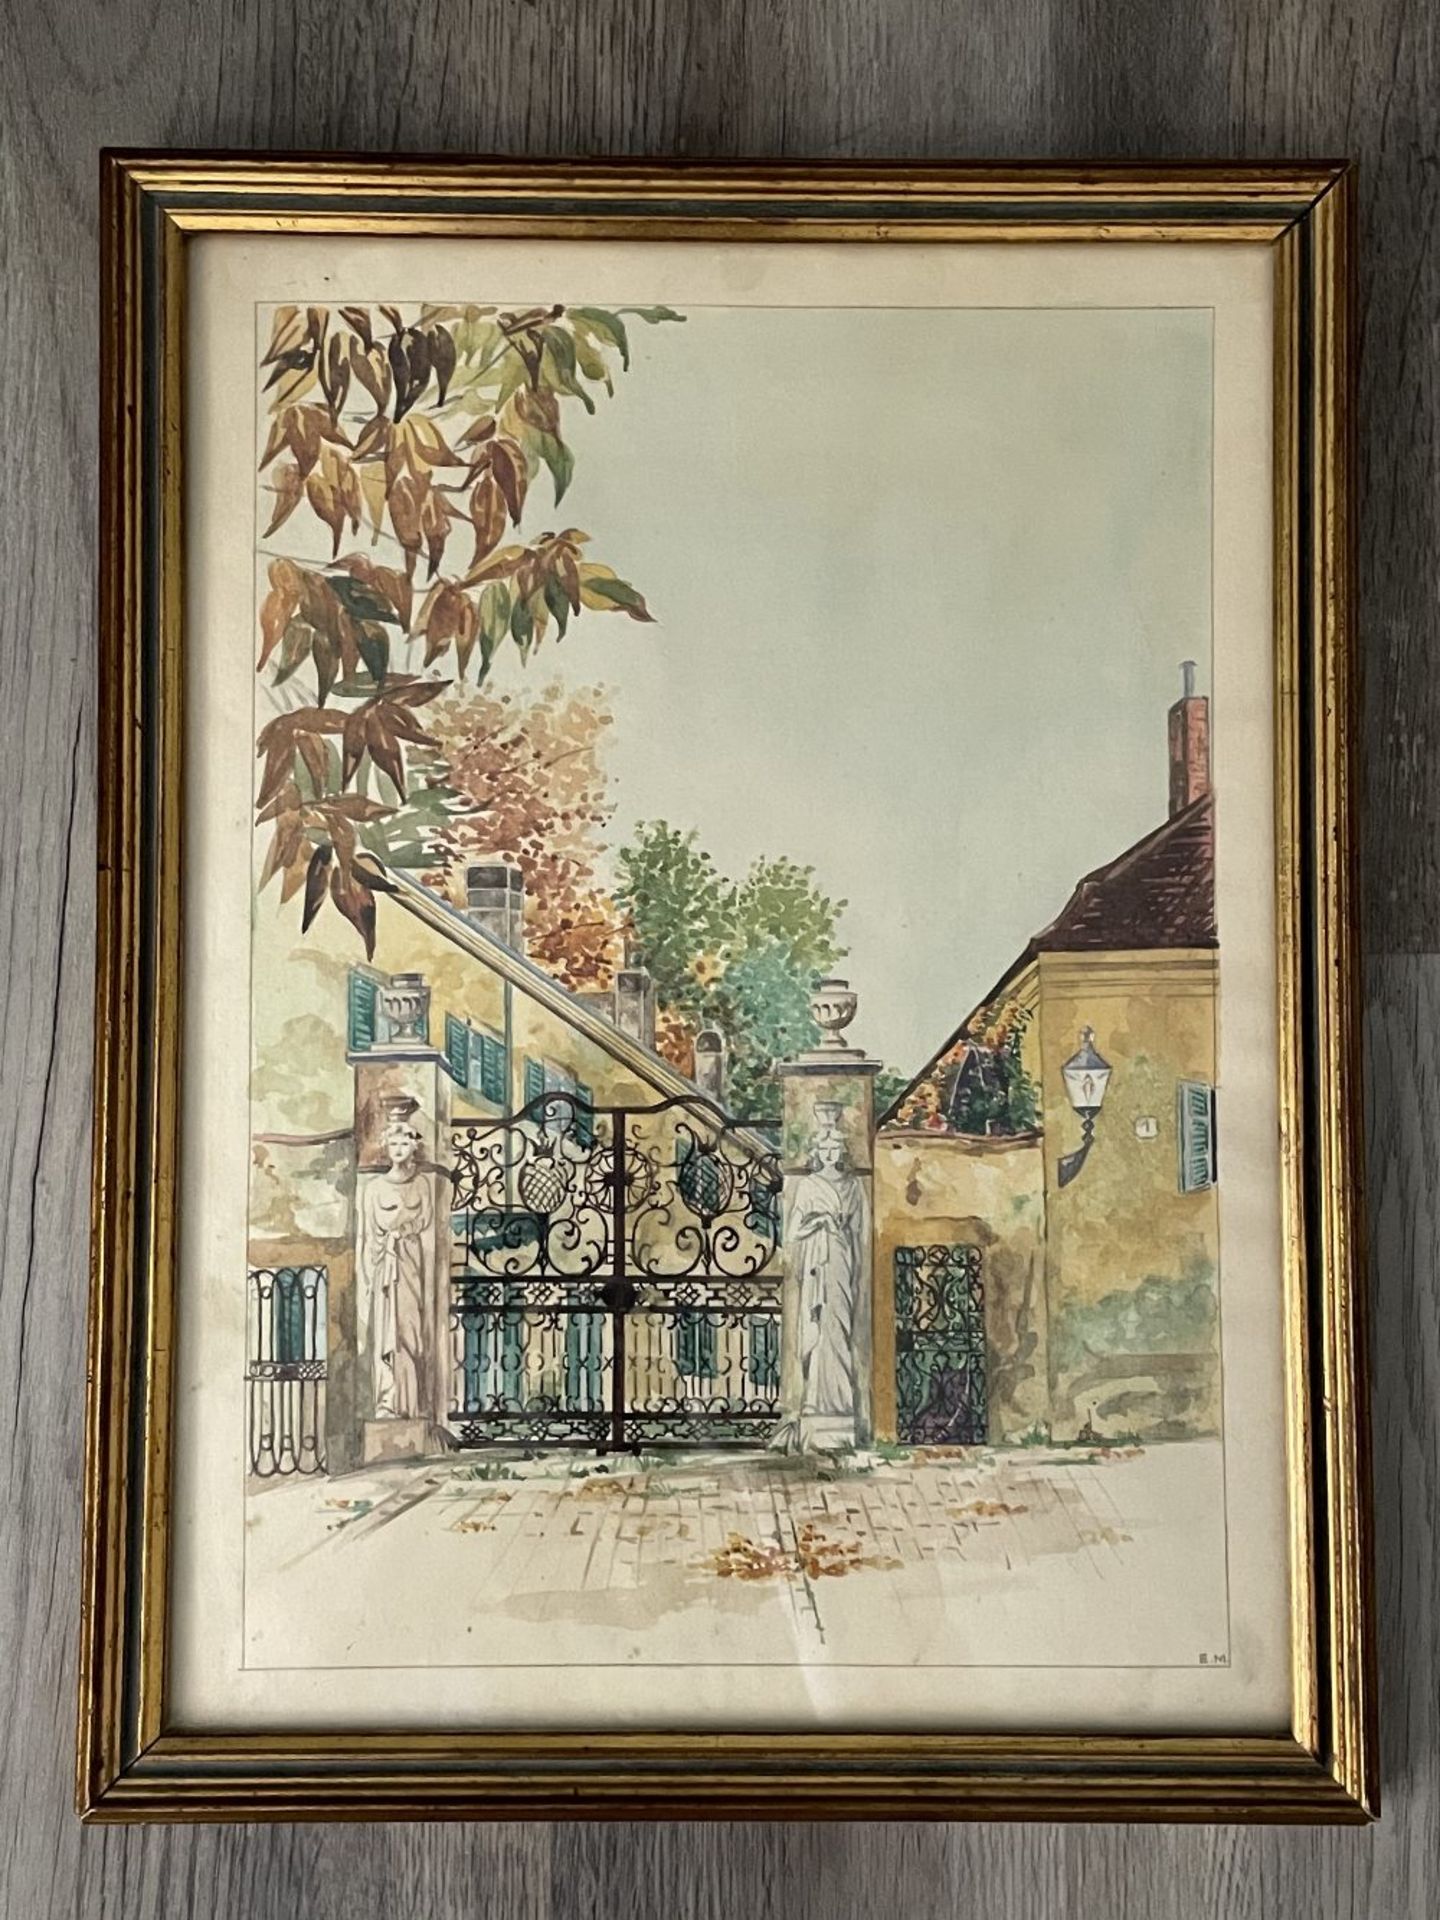 Framed watercolor art (Print or original?), brought over from WW2 Europe, 20x12"